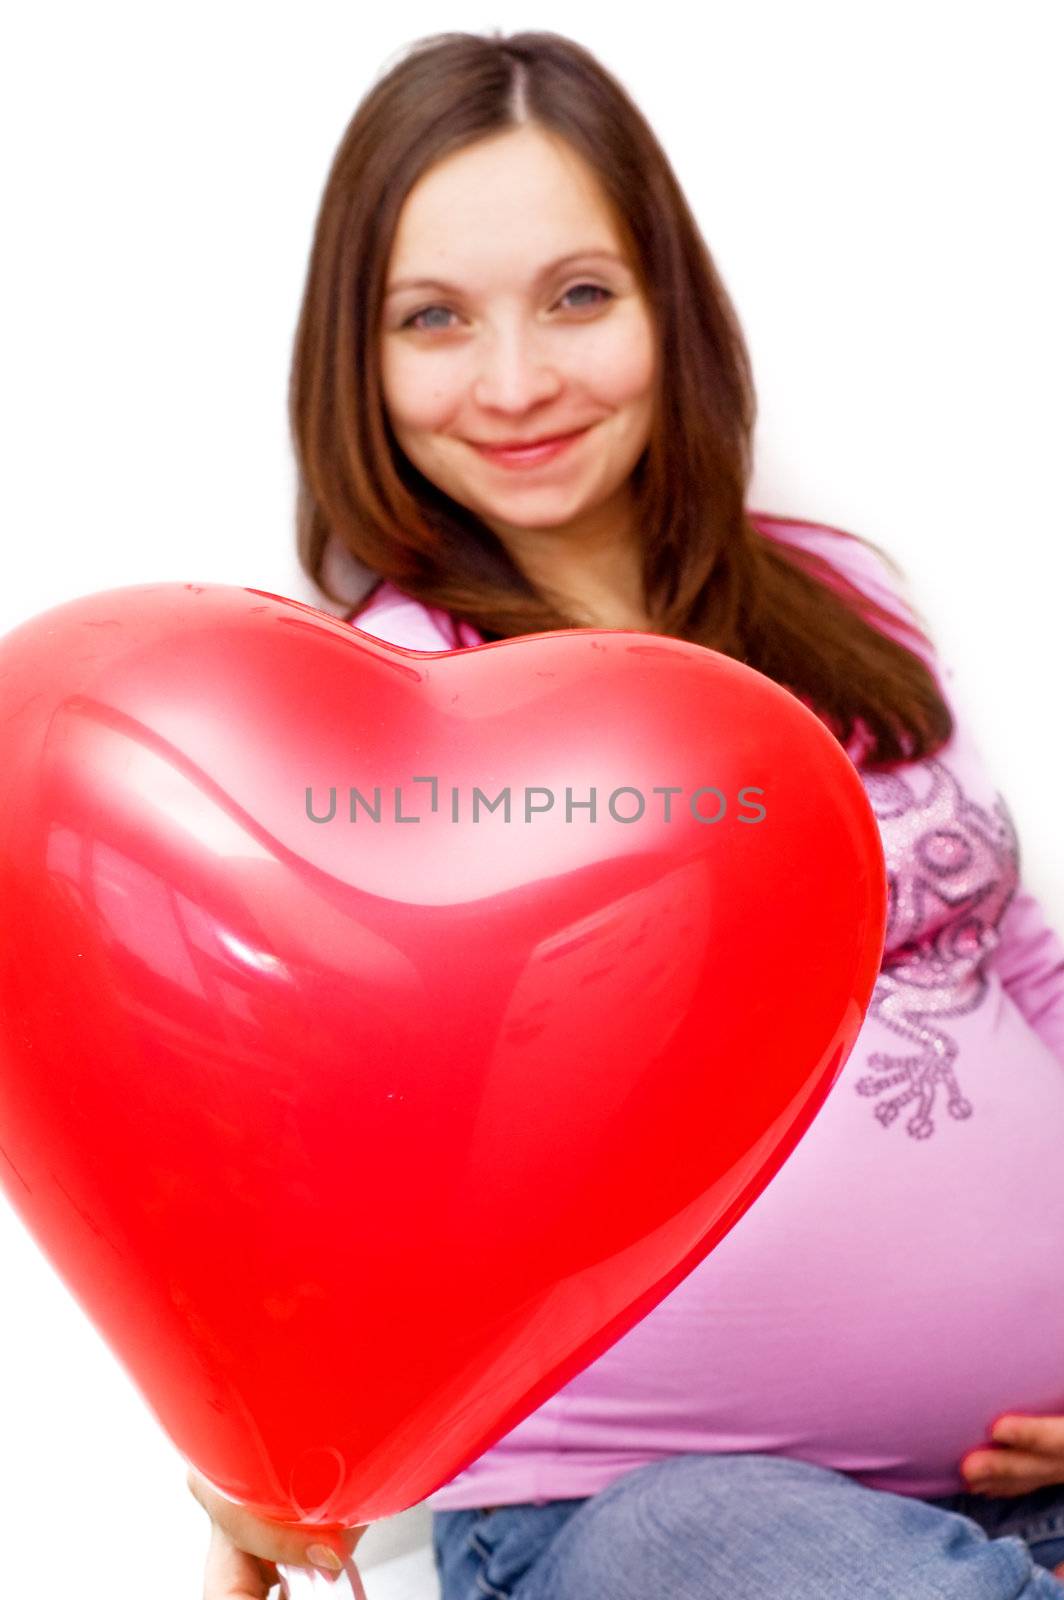 Pregnant woman with heart shaped balloon, focus on balloon